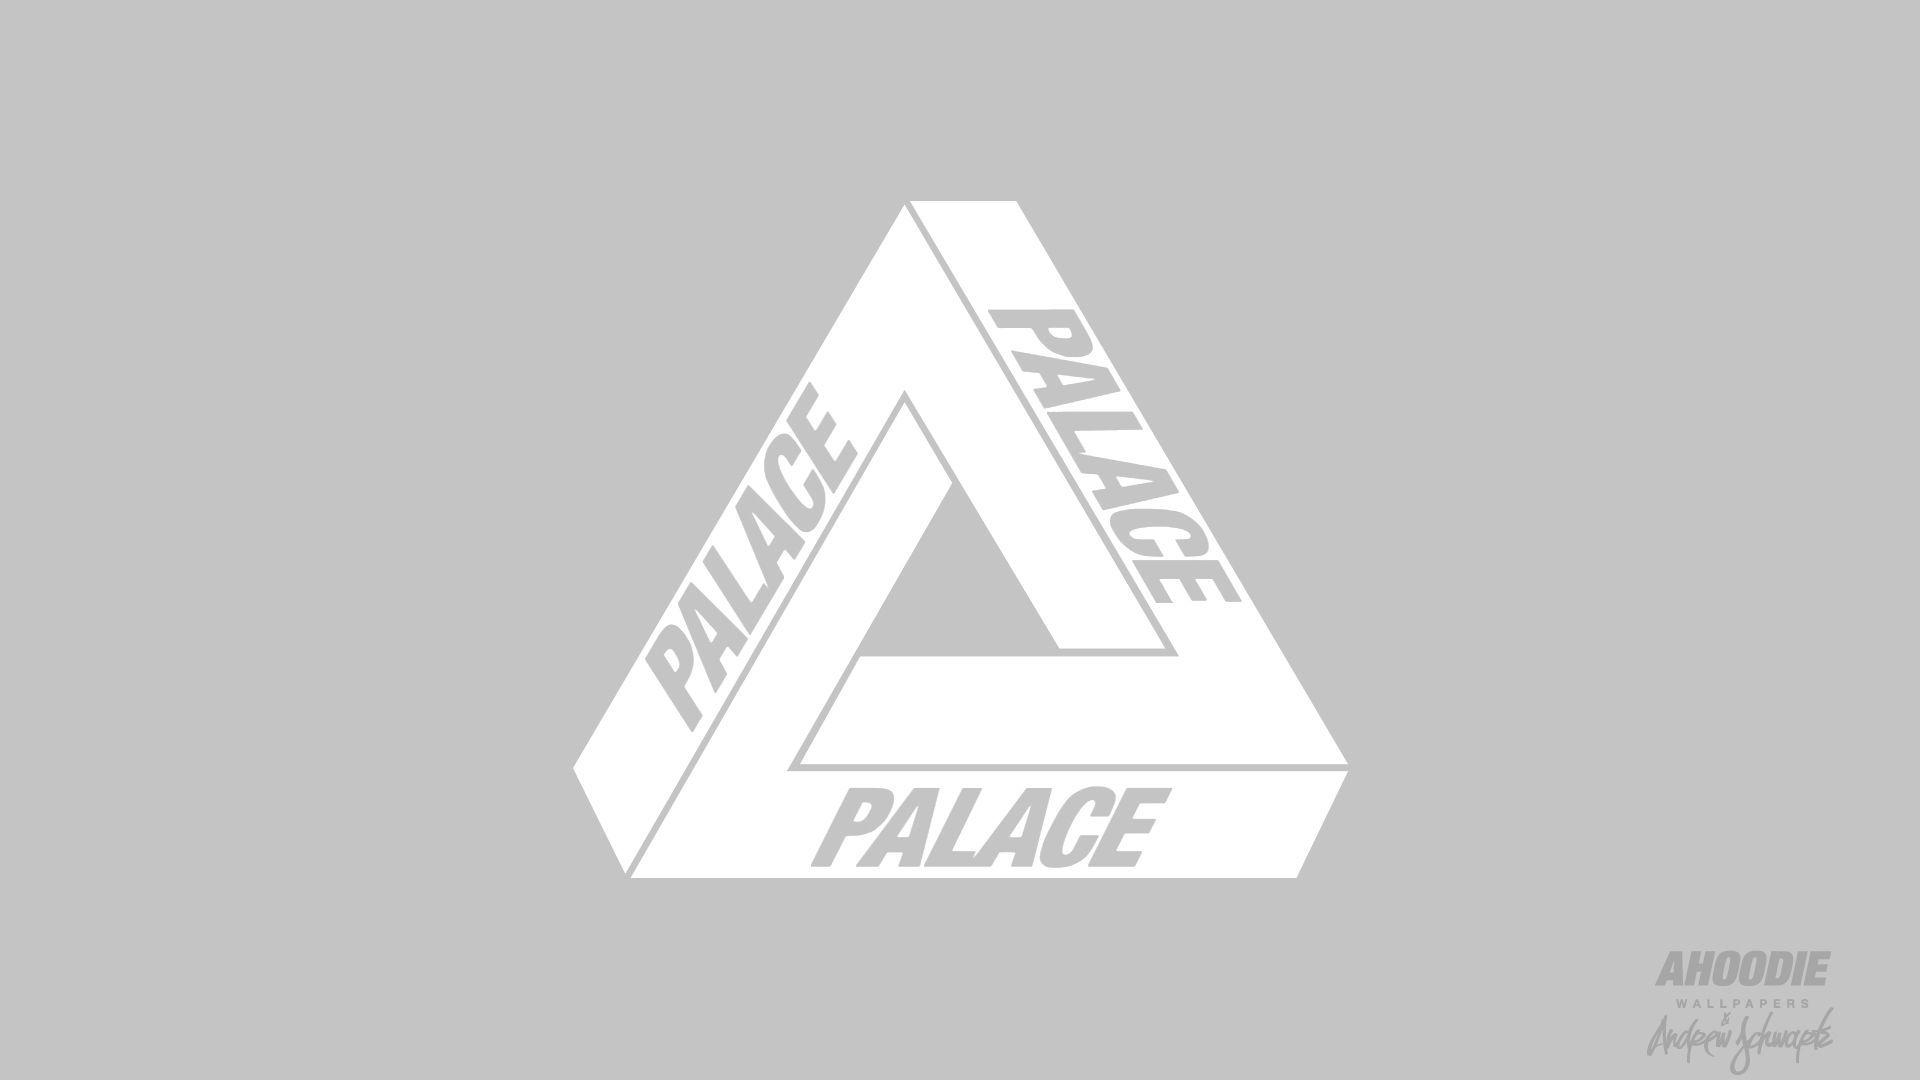 Palace Skateboards Wallpapers - Wallpaper Cave